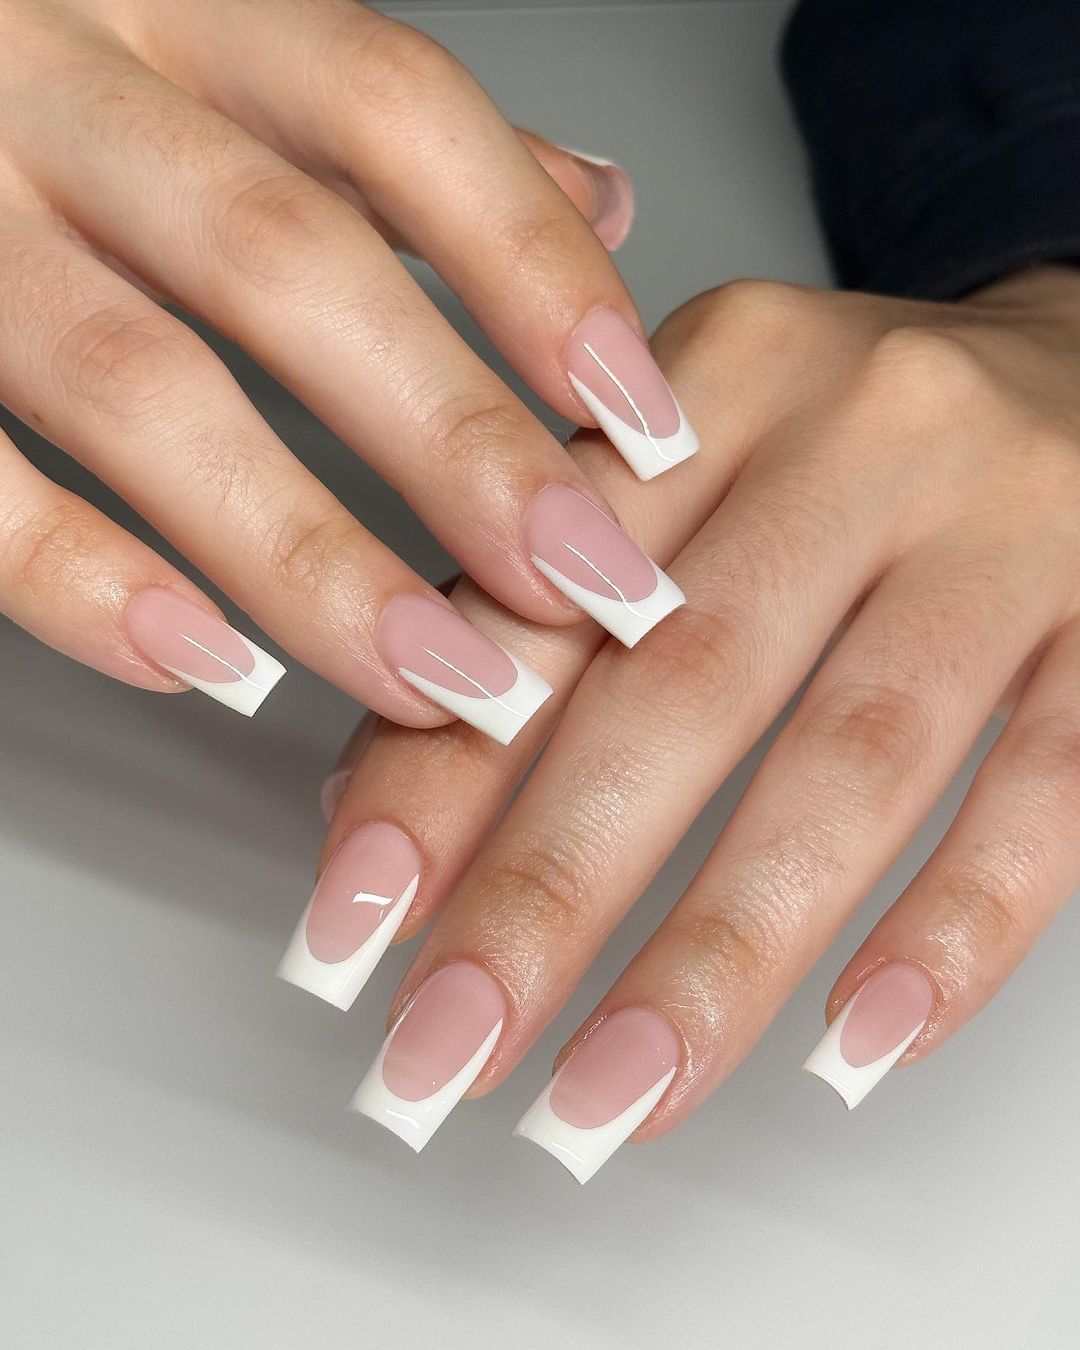 Short Square Pink and White Nails